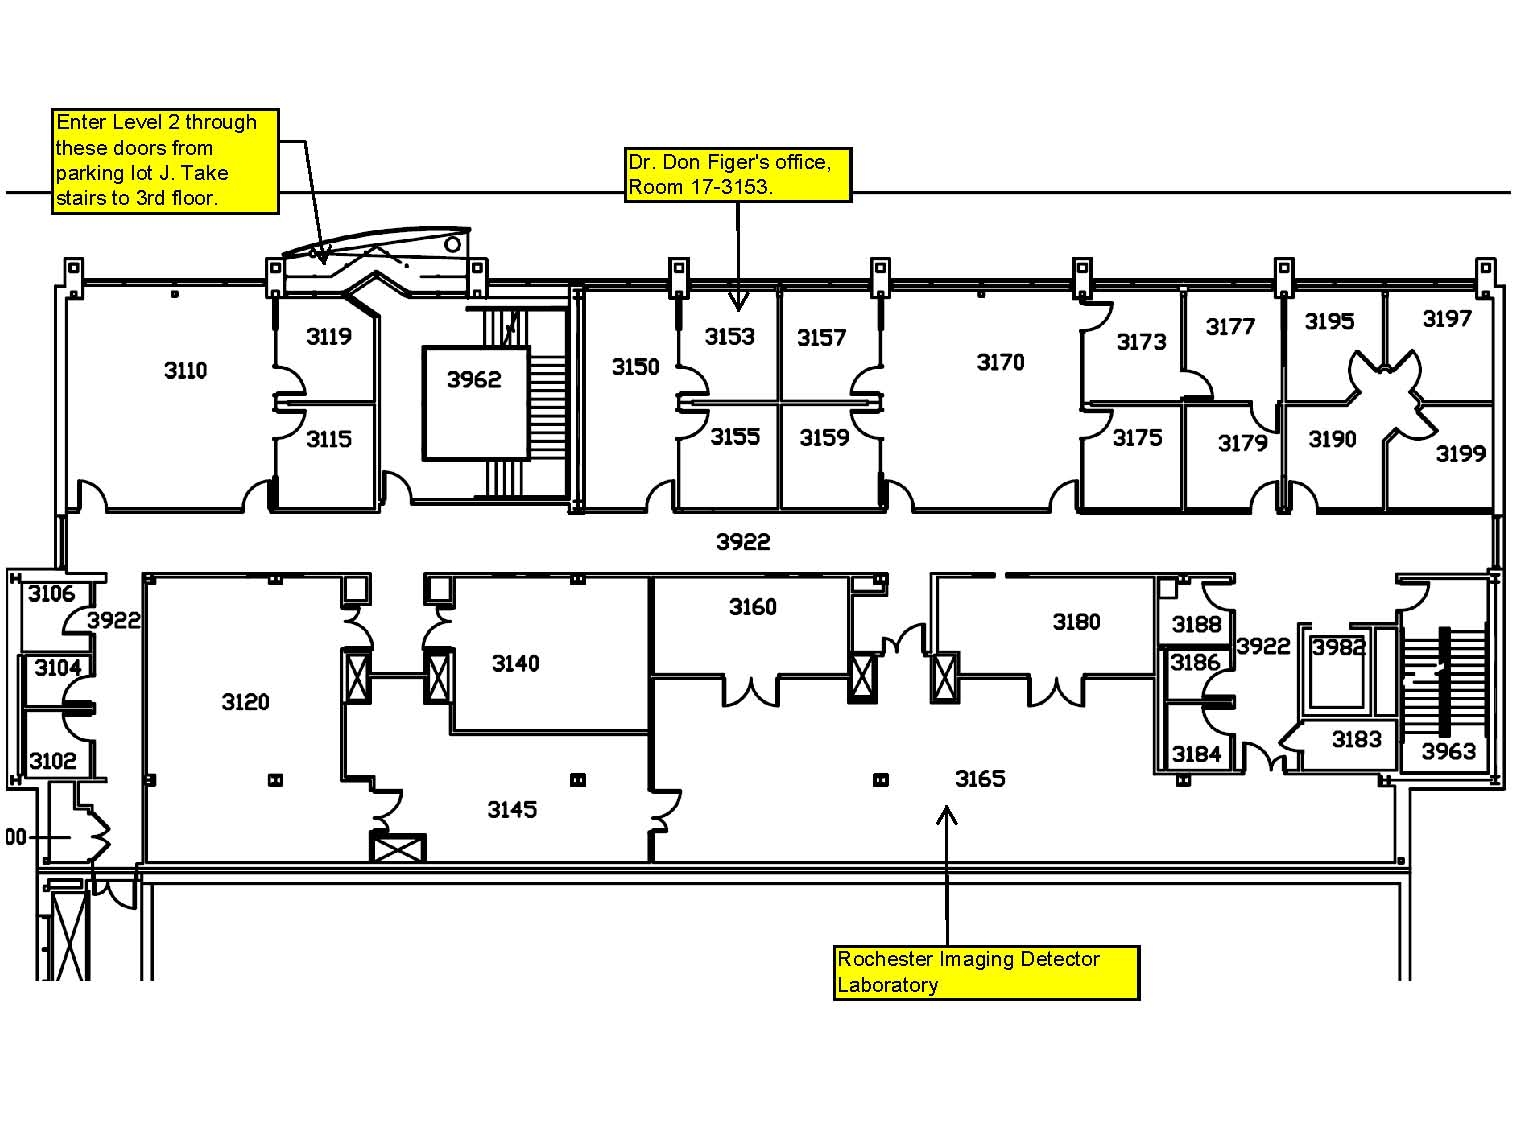 7 Pics Rit Residence Halls Floor Plans And Review Alqu Blog